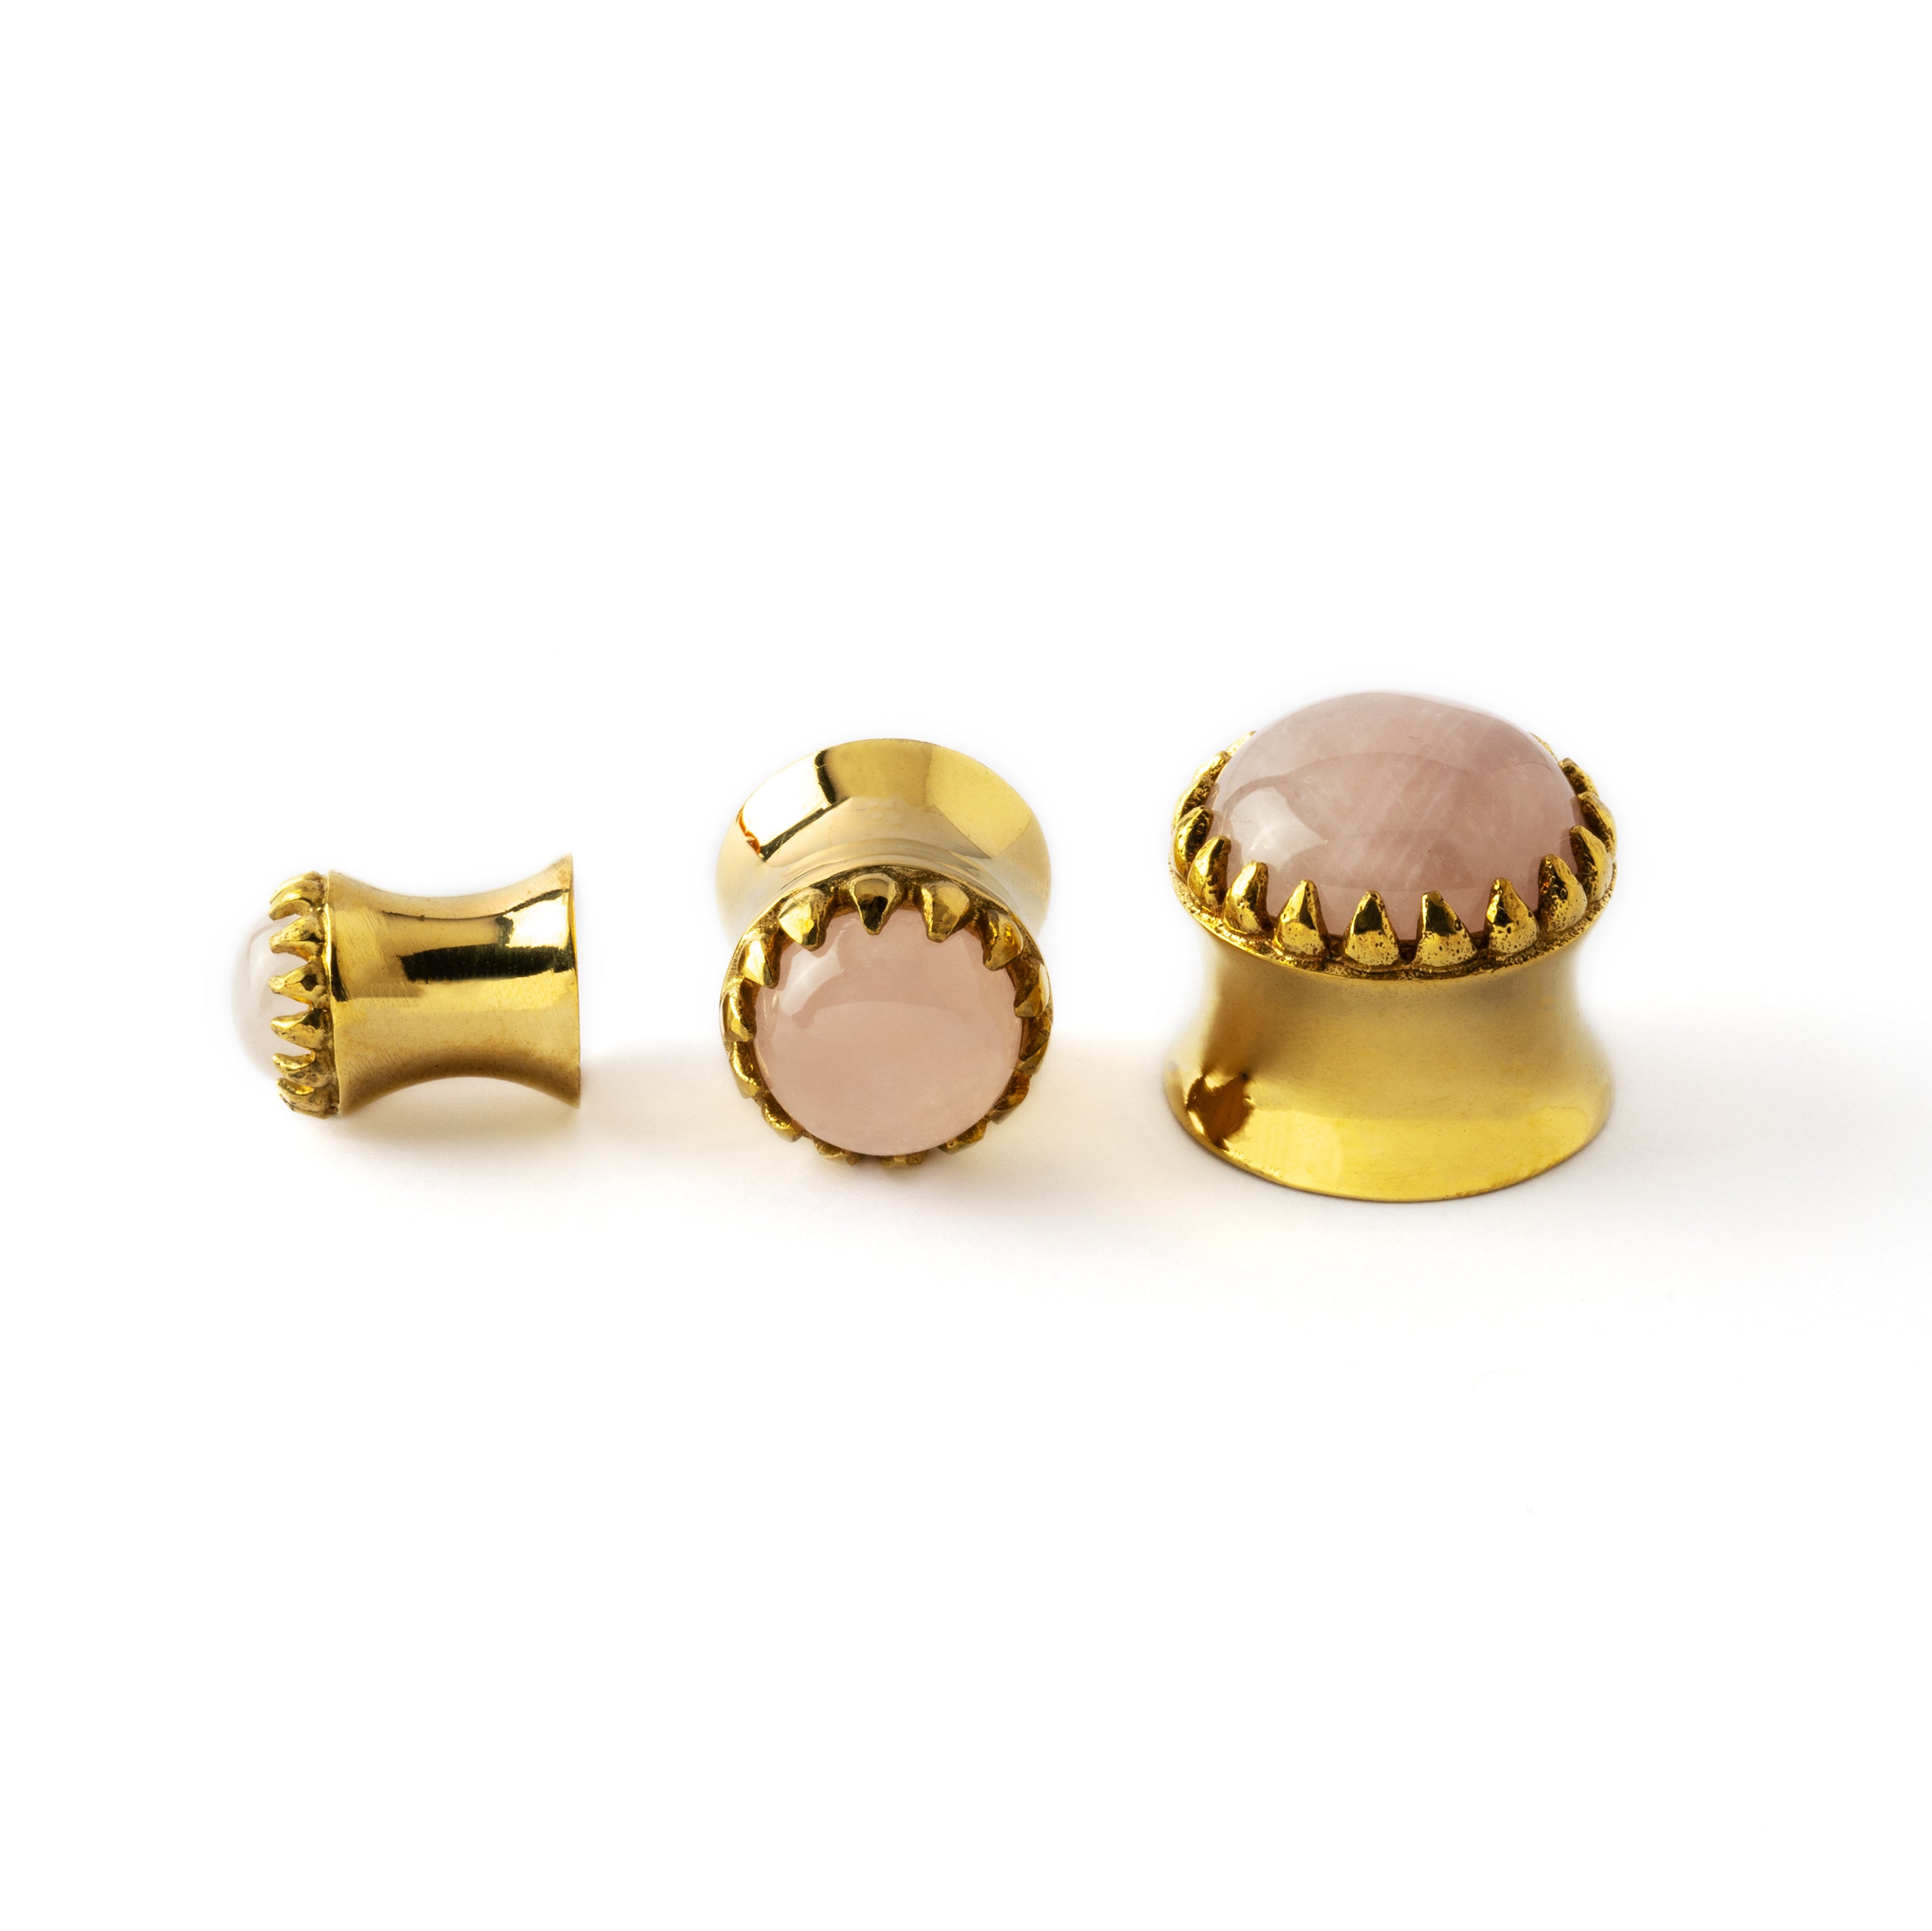 golden ear plug crown shaped with centred rose quartz in variety of sizes